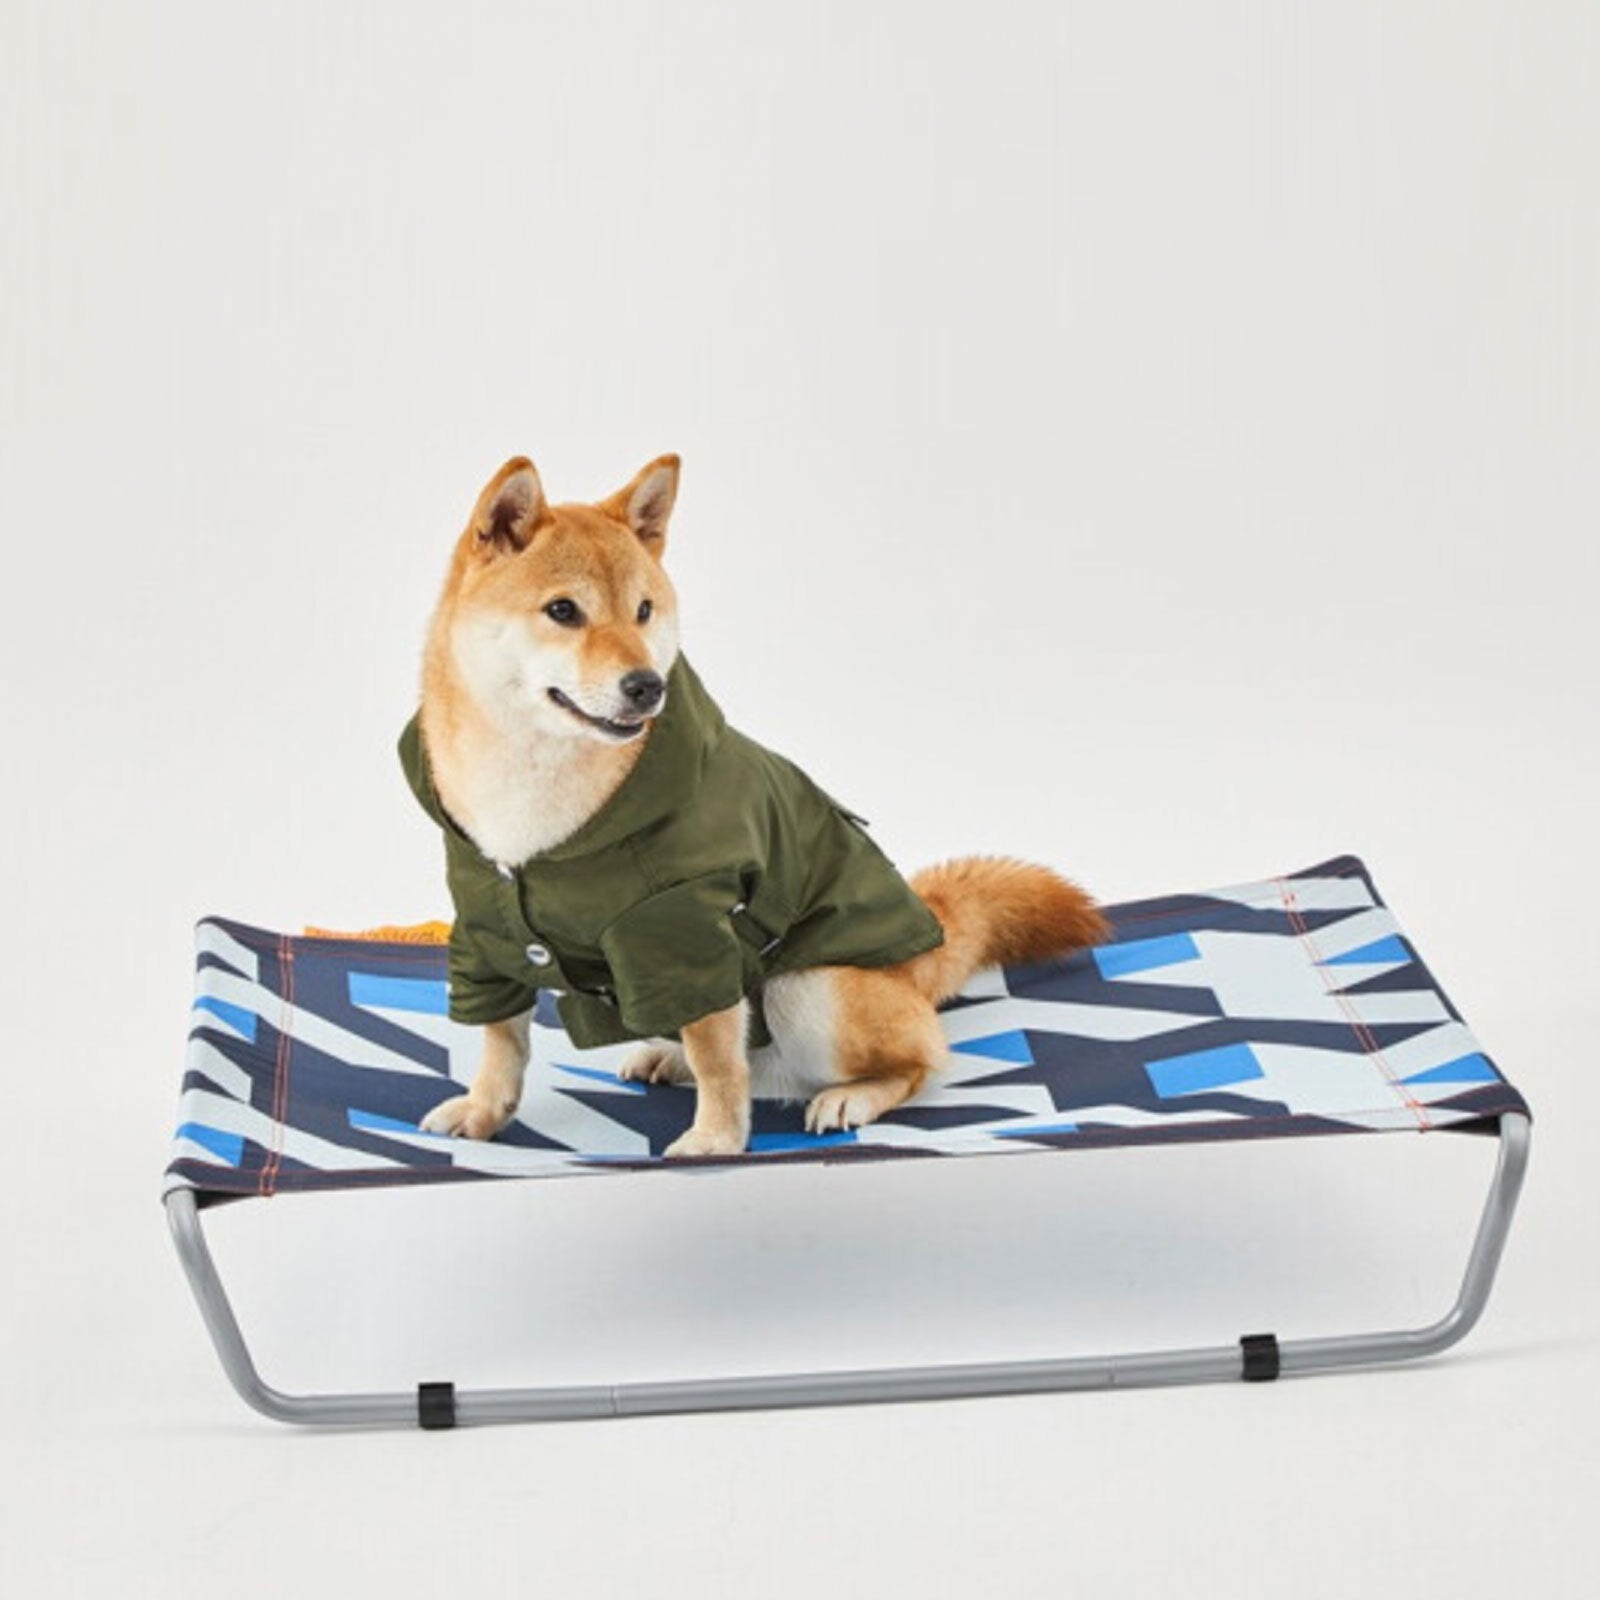 PETKIT Pet Elevated Bed – Blue